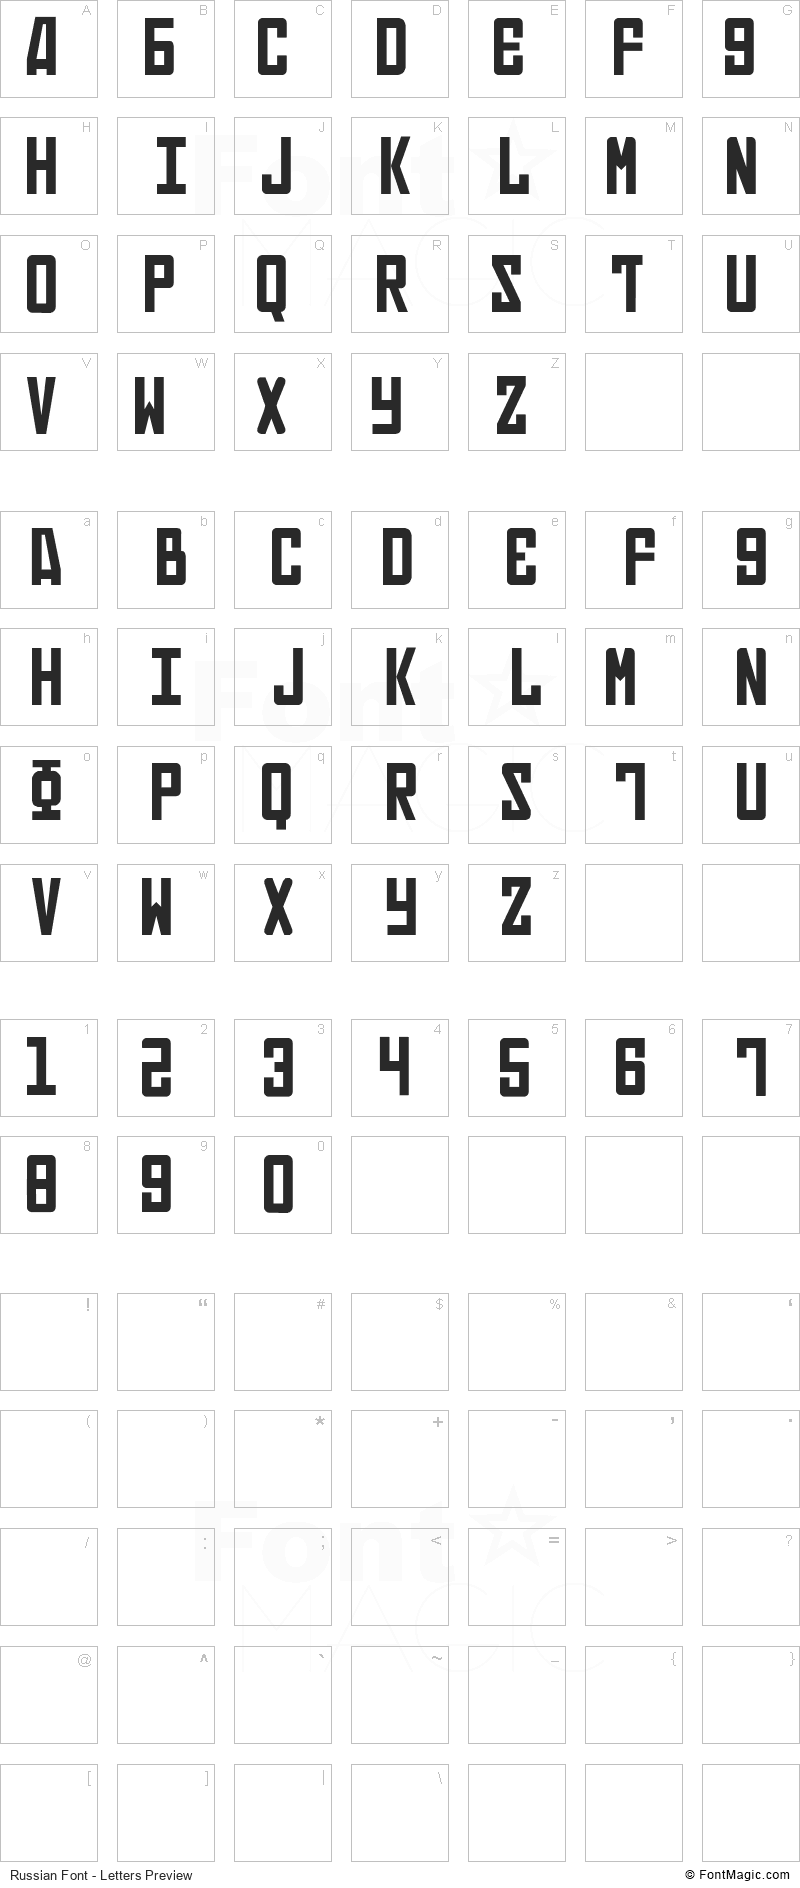 Russian Font - All Latters Preview Chart